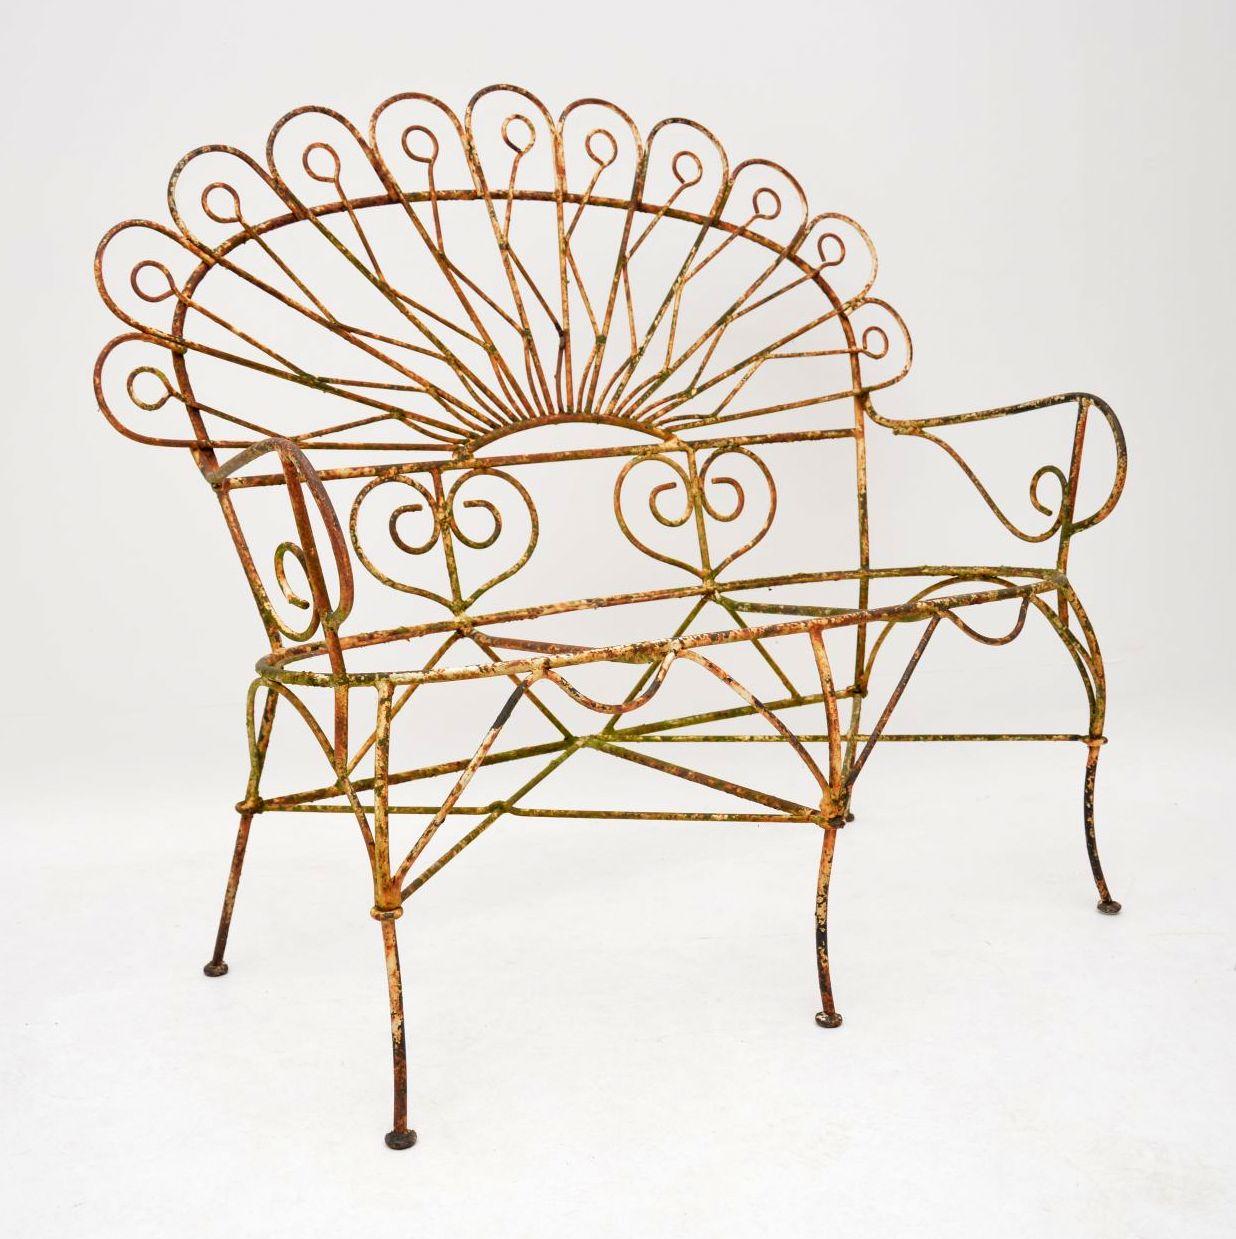 Antique distressed painted wrought iron garden seat, two matching chairs and table. The seat and chairs have quite an unusual style & I can’t quite work out the age or country of origin. We took them out of a garden from a London residence along